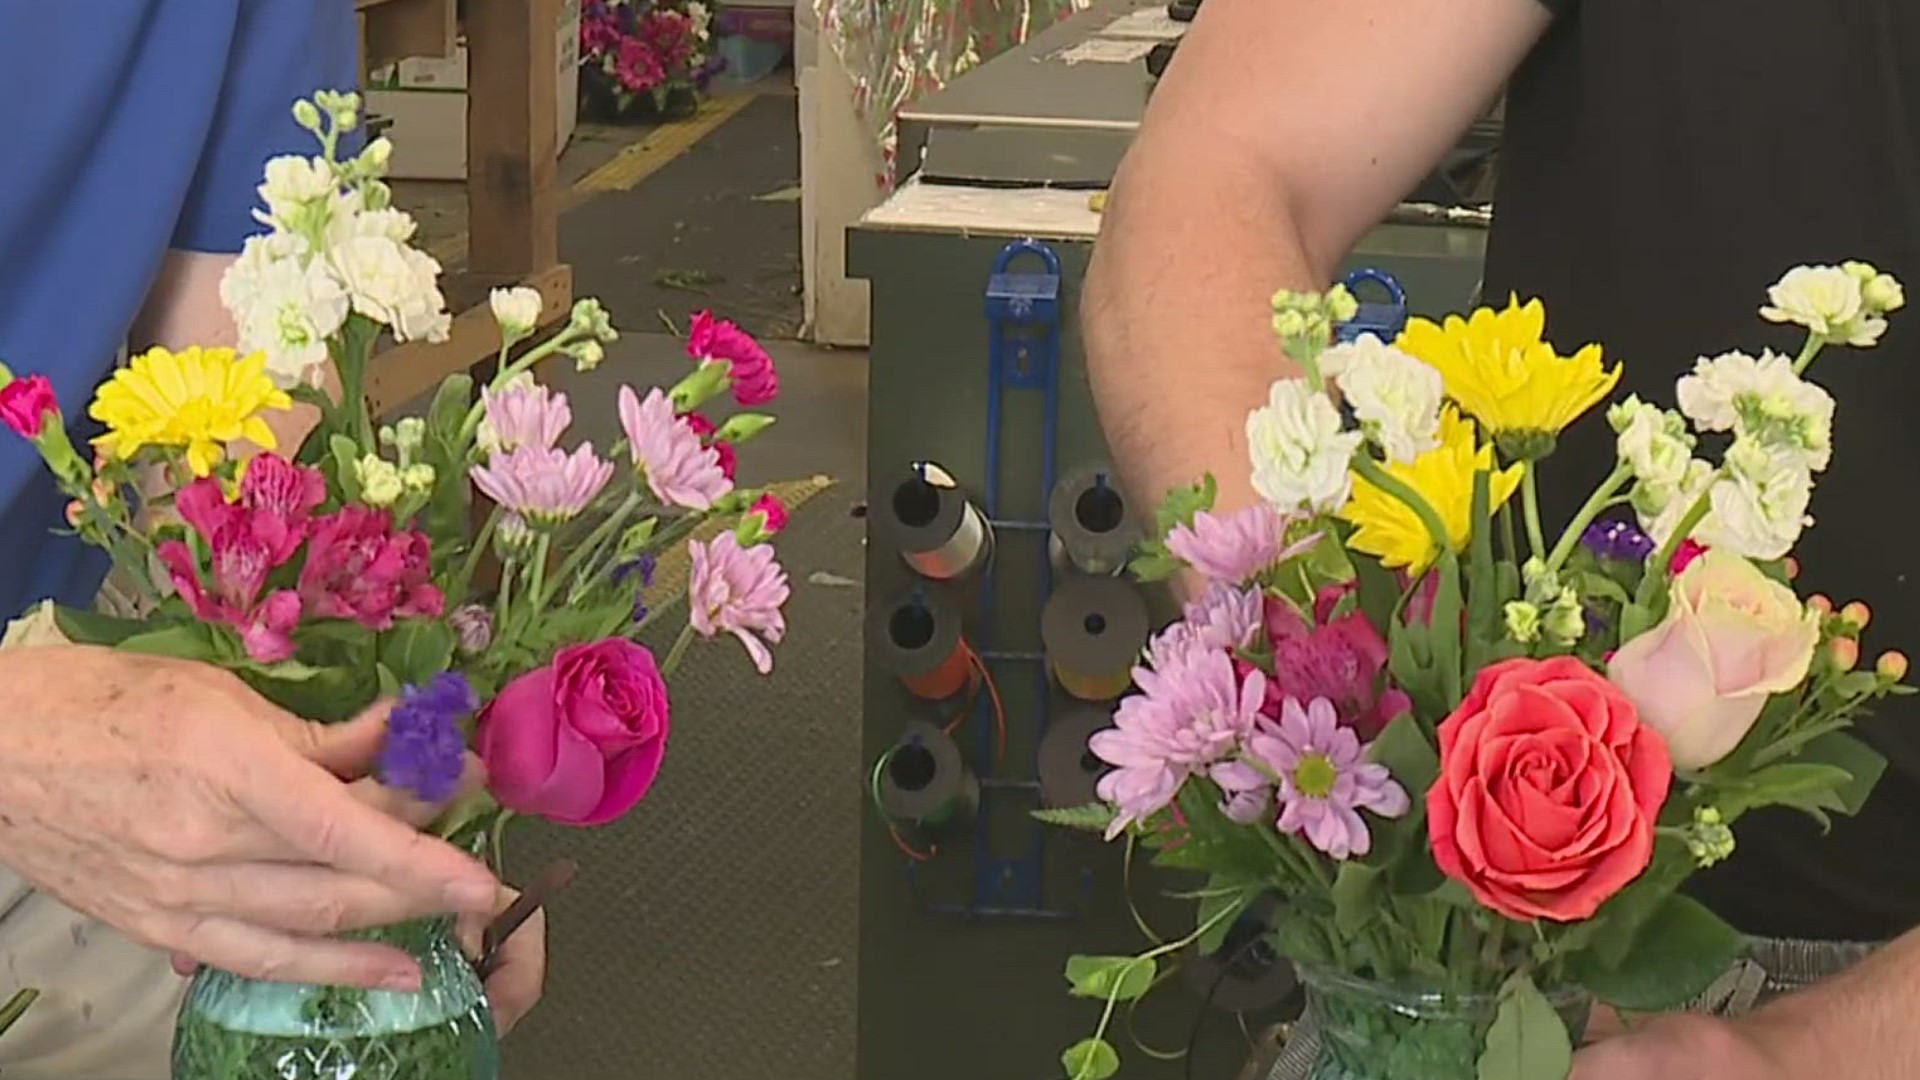 FOX43's Tyler Hatfield headed over to Royer's Flowers and Gifts in York to learn what it takes to make flower arrangements for Mother's Day.